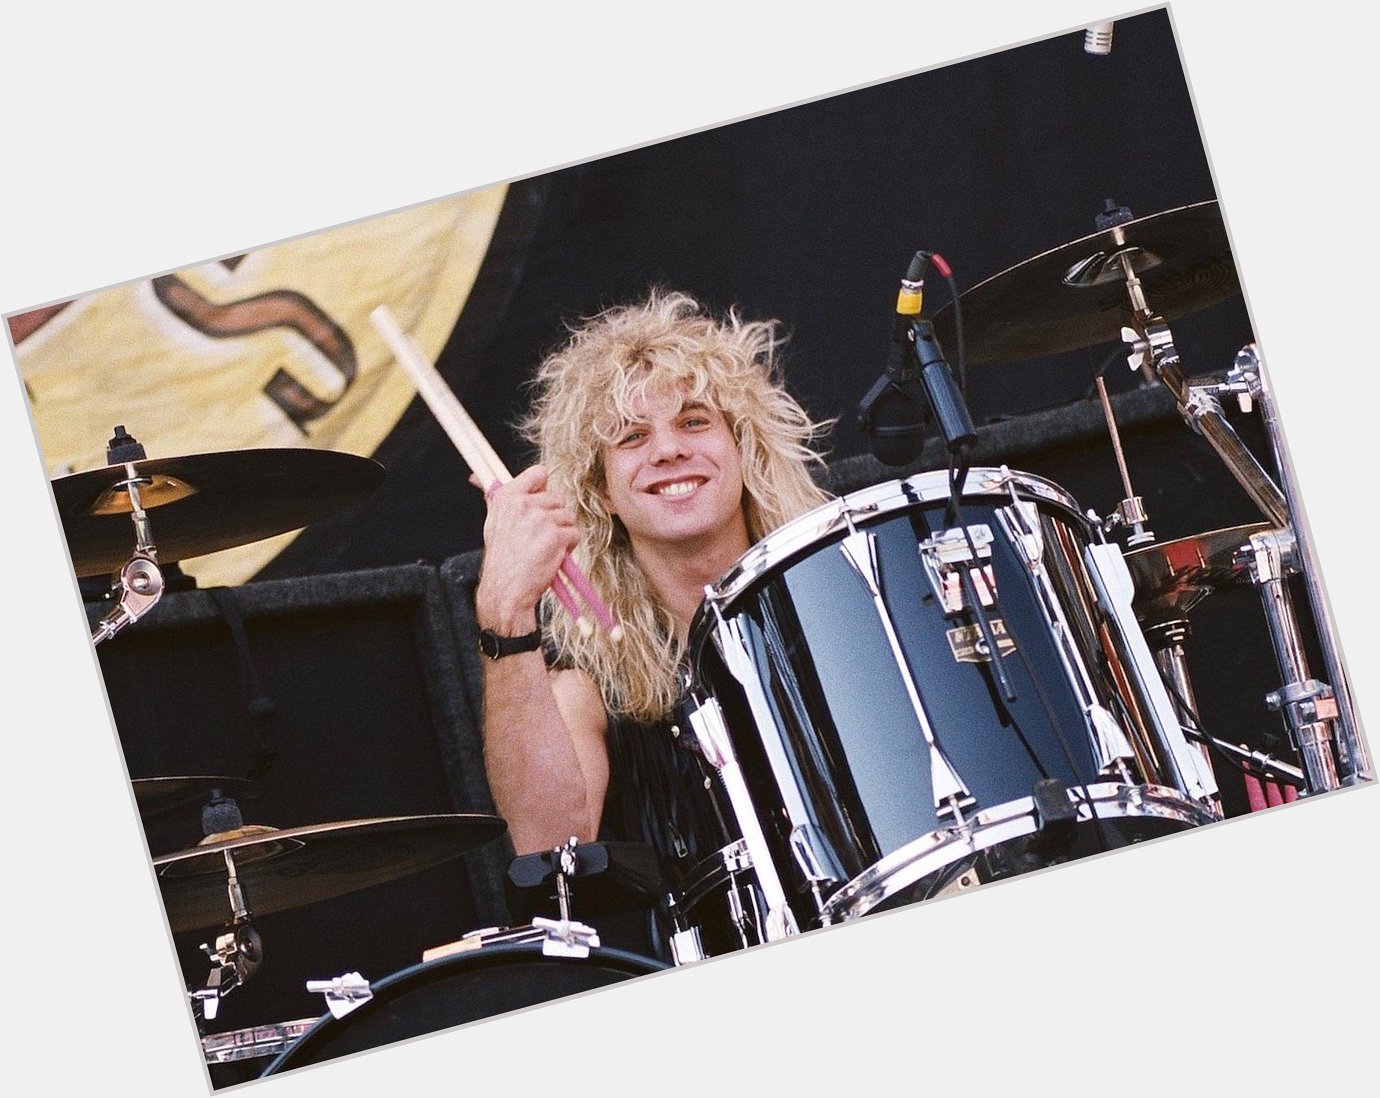 Please join me here at in wishing the one and only Steven Adler a very Happy 56th Birthday today  